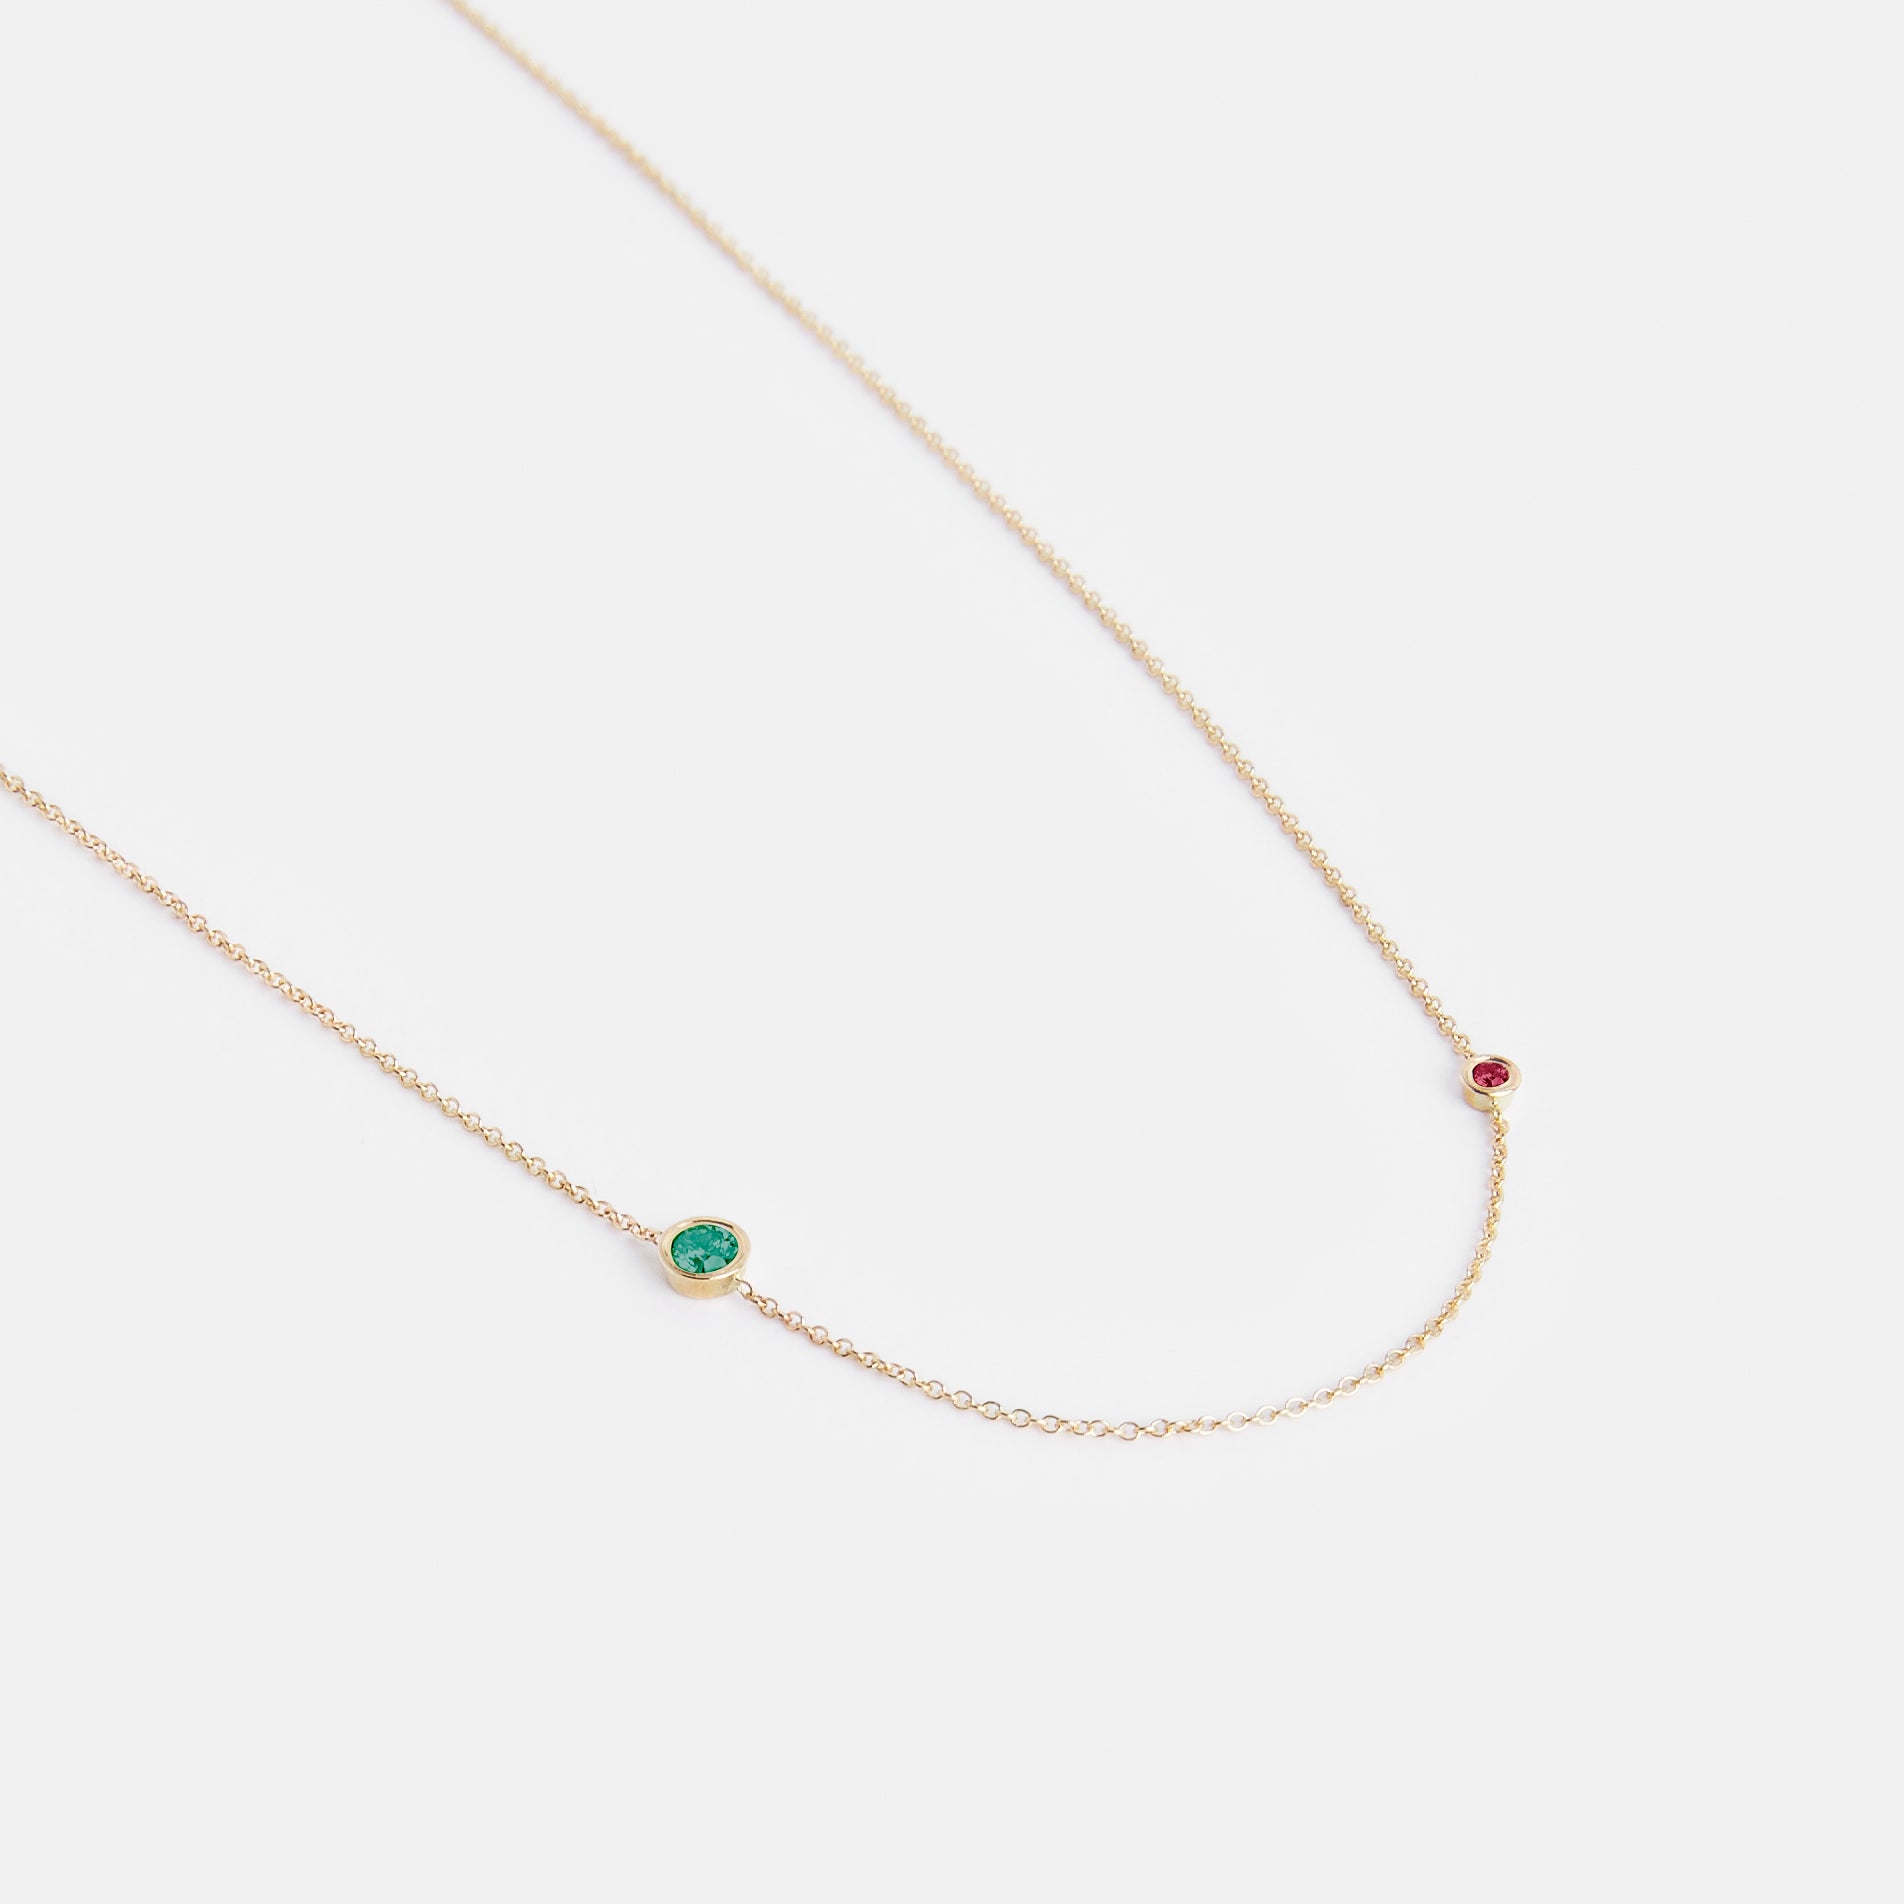 Iba Simple Necklace in 14k Gold set with Emerald and Ruby By SHW Fine Jewelry NYC